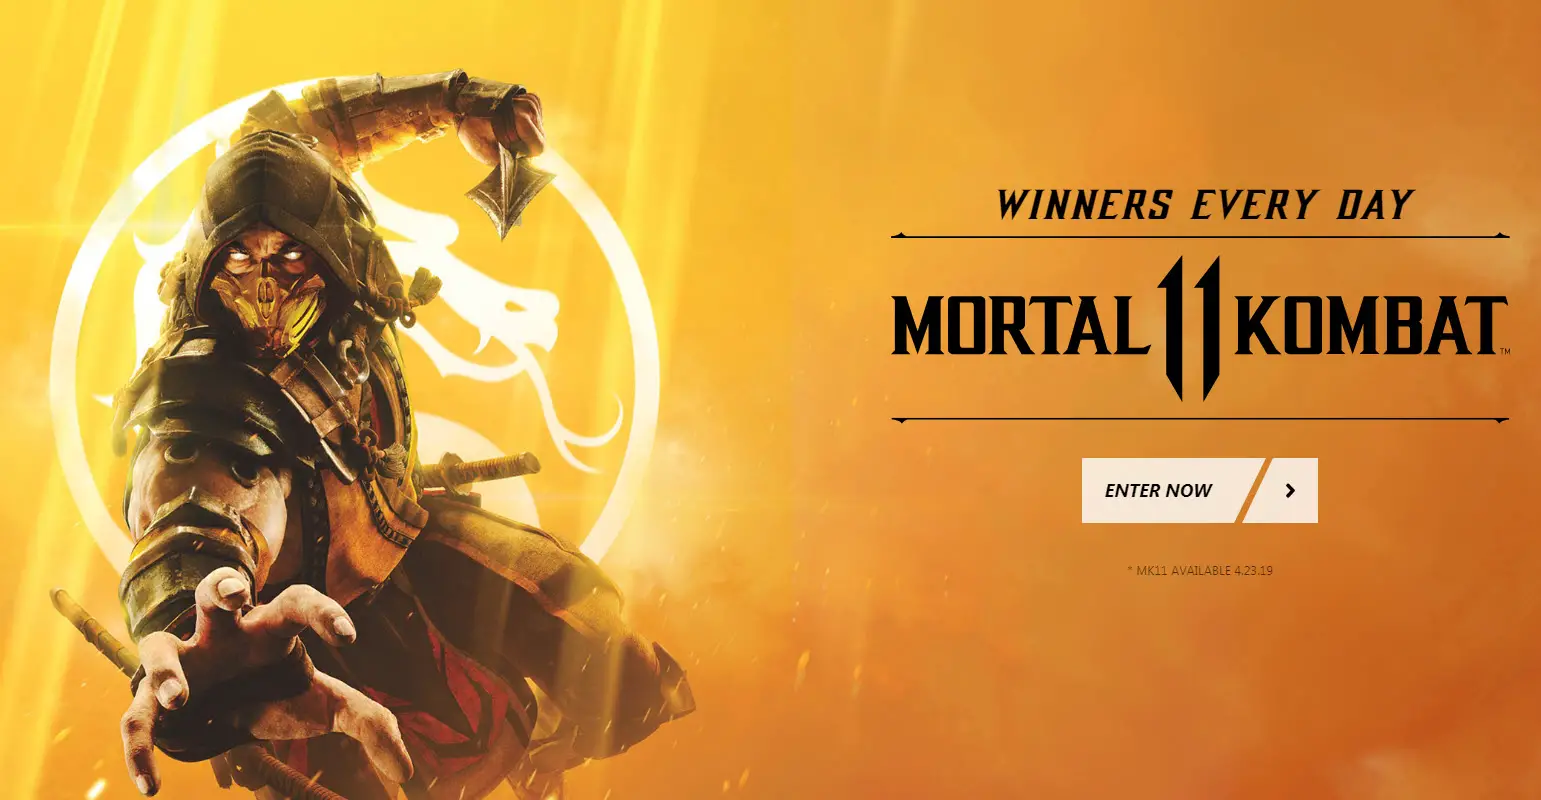 Enter the Rockstar Mortal Kombat 11 Sweepstakes online or by text for your chance to win XBox One X consoles and Mortal Kombat 11 game and other prizes